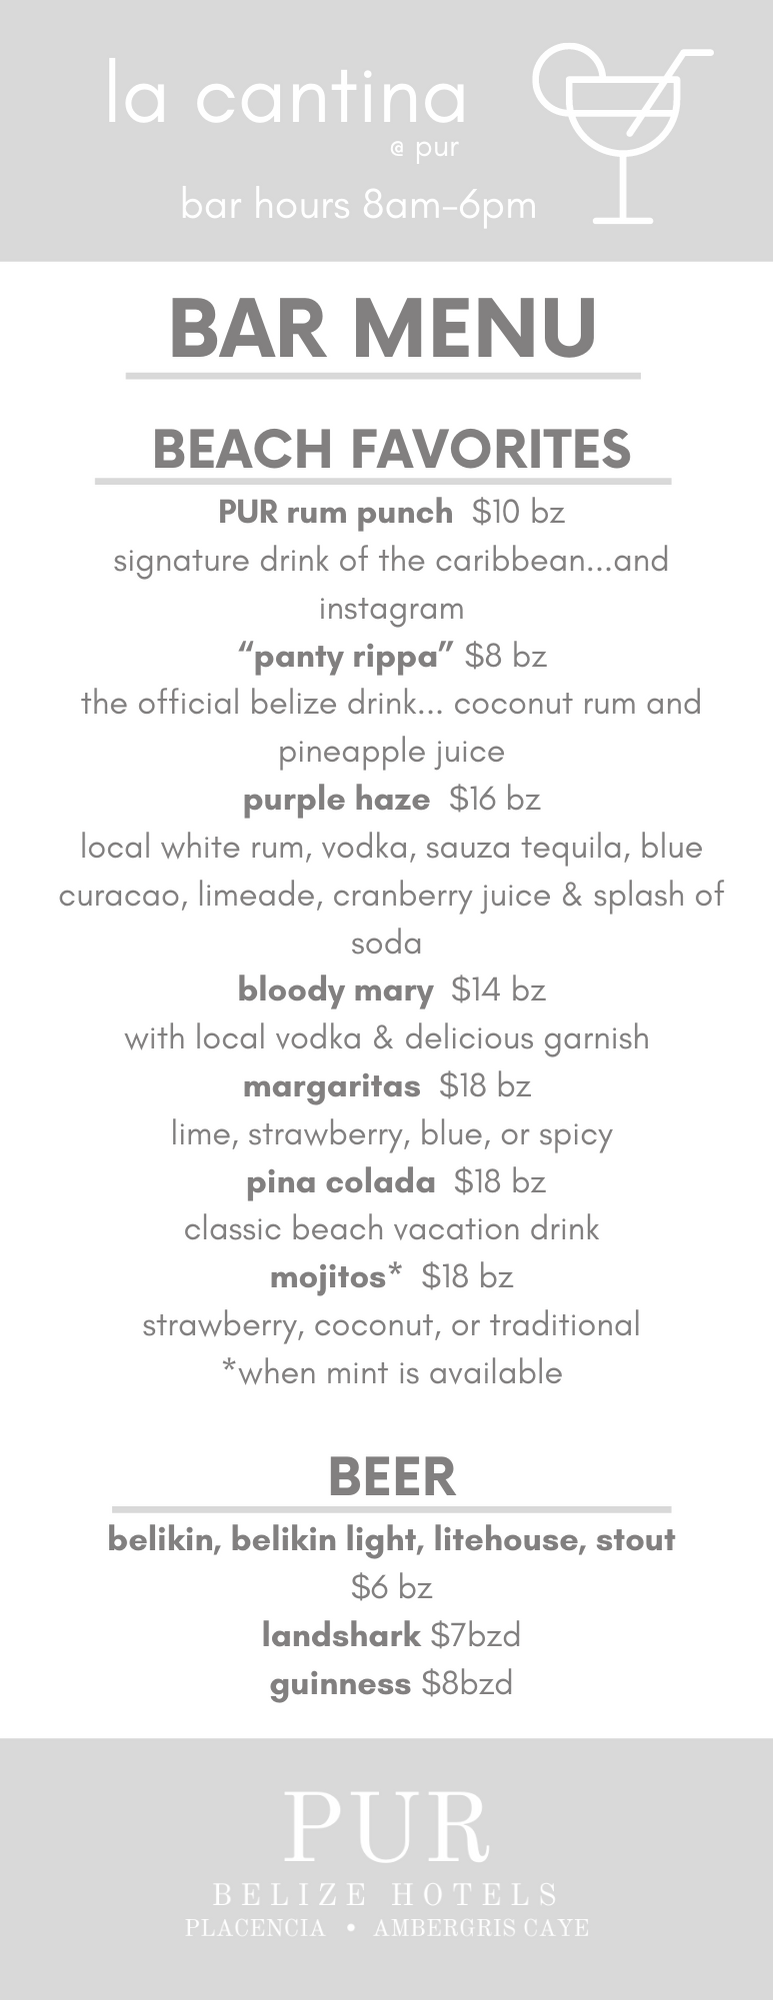 BEACH FAVORITES PUR rum punch $10 bz signature drink of the caribbean...and instagram “panty rippa” $8 bz the official belize drink... coconut rum and pineapple juice purple haze $16 bz local white rum, vodka, sauza .png